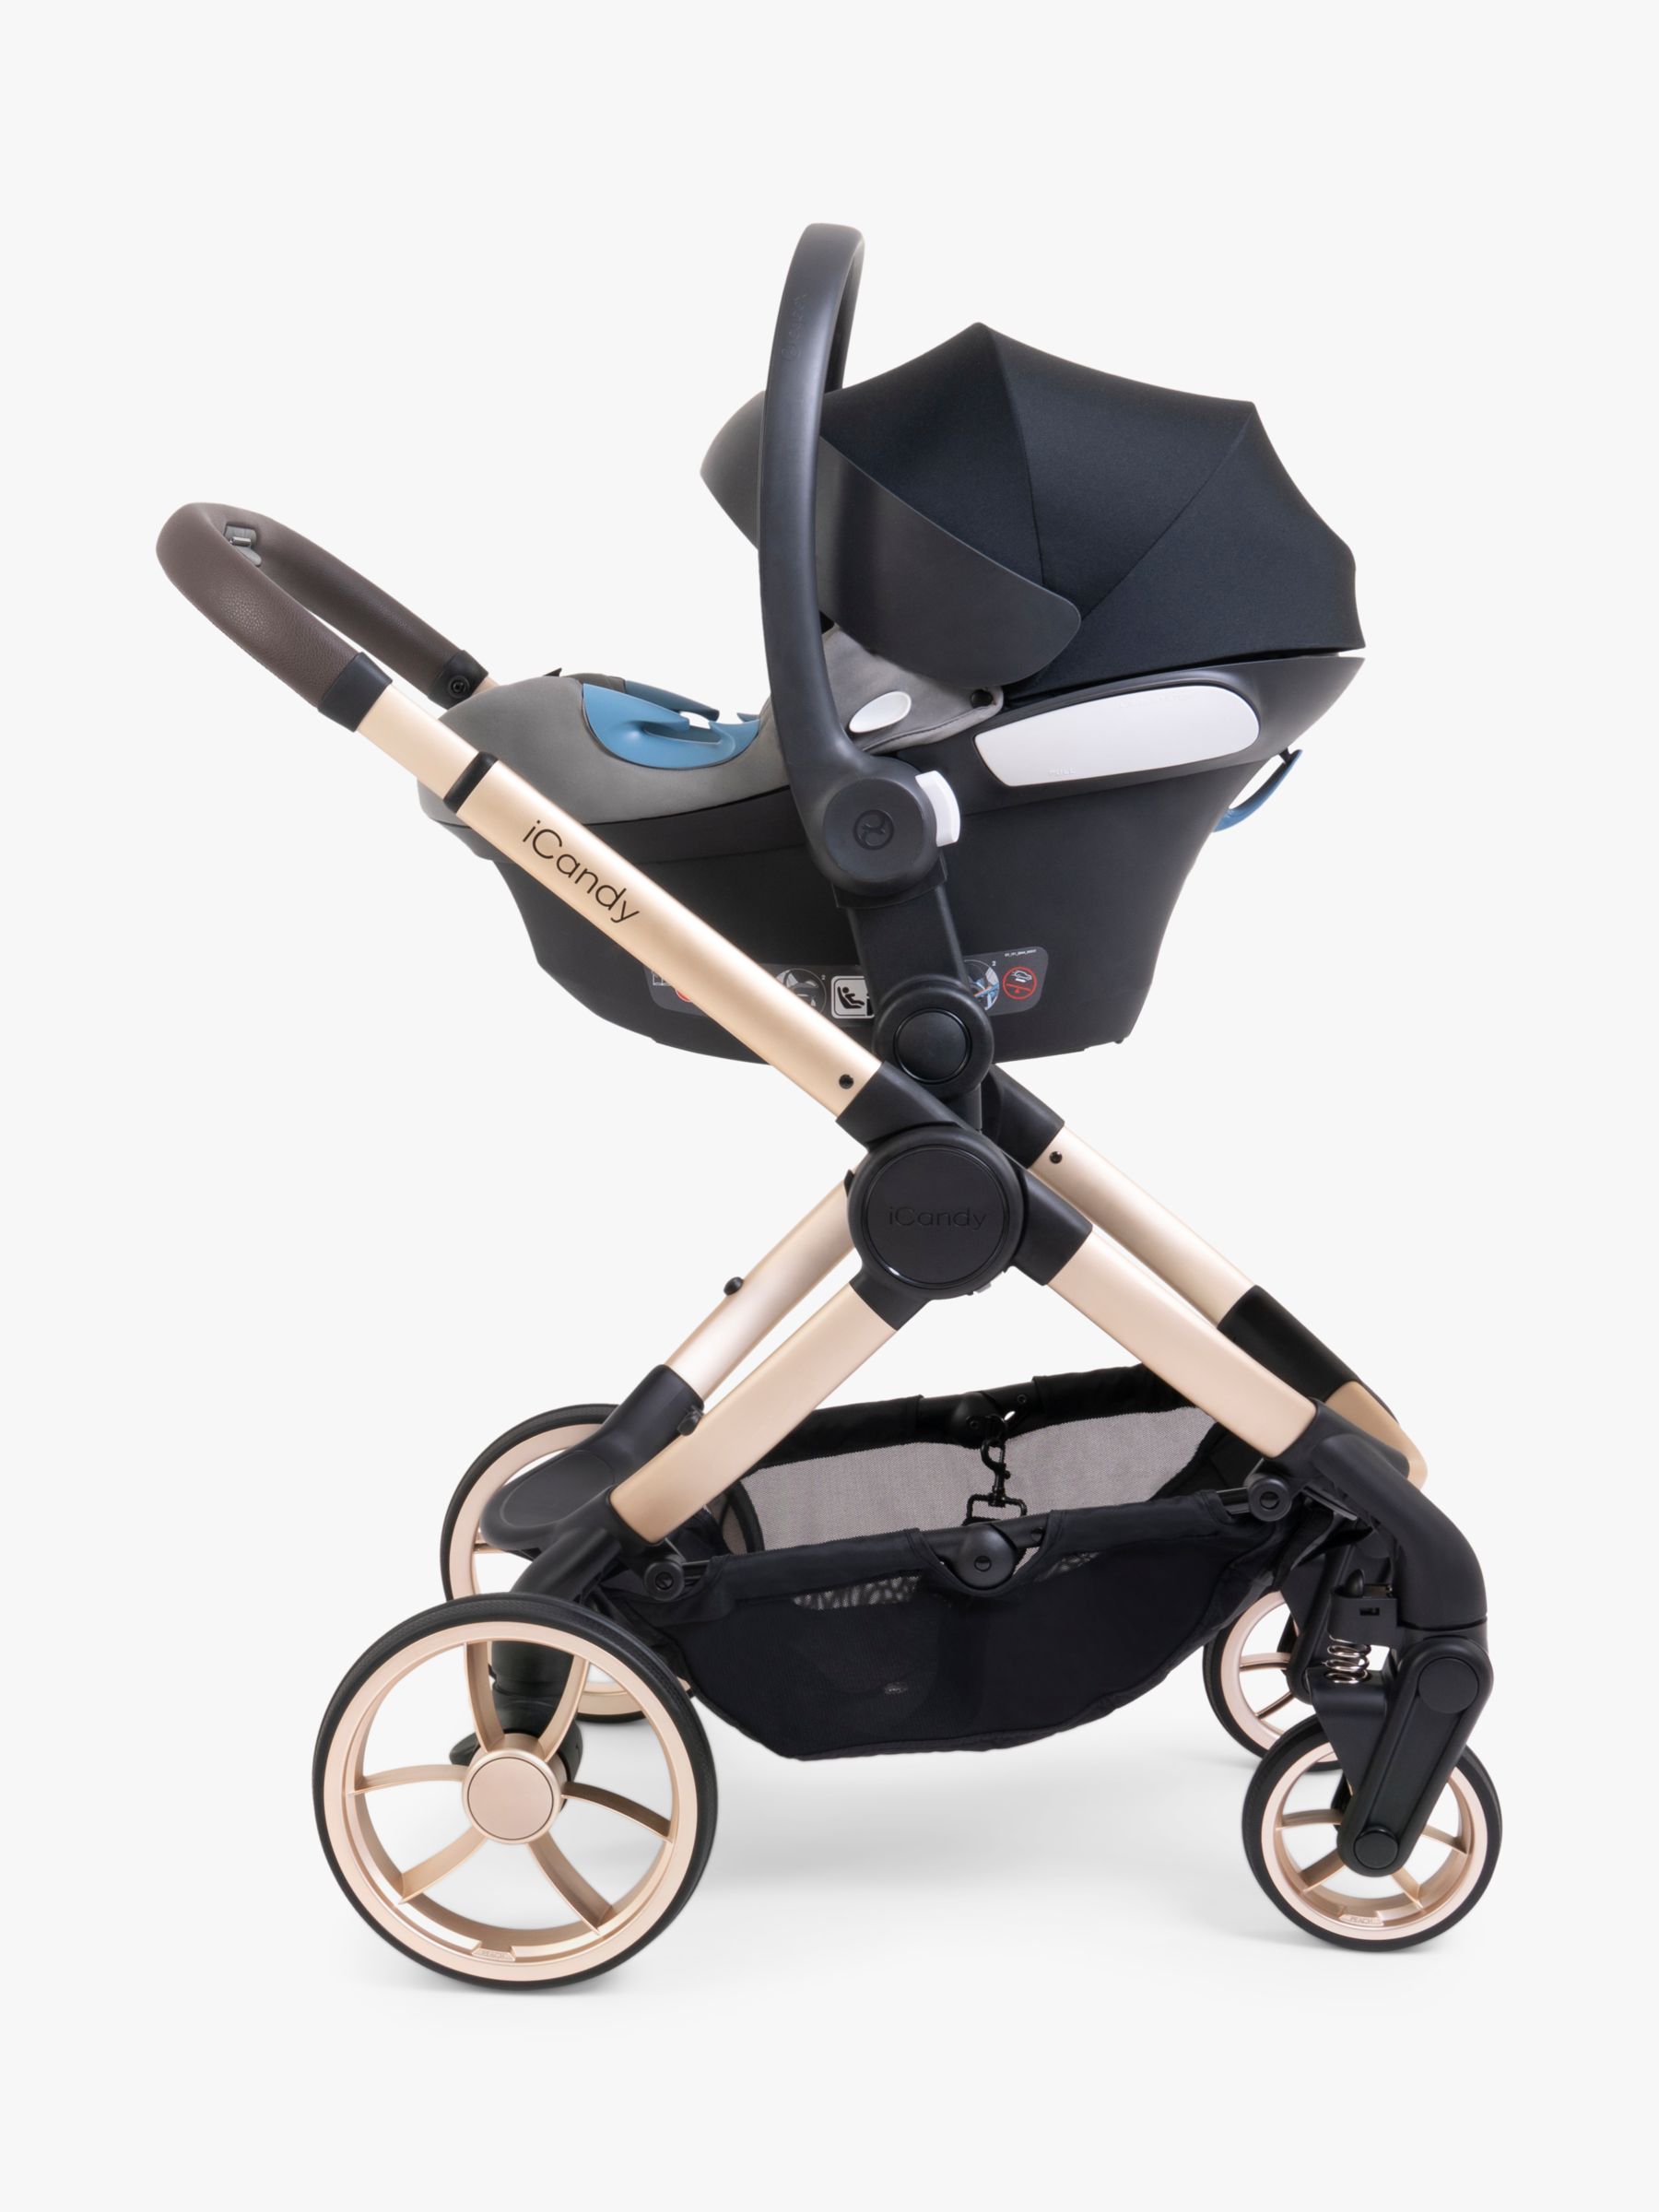 iCandy Peach 7 Pushchair & Accessories with Cybex Cloud T Baby Car Seat and Base T Bundle, Biscotti/Deep Black